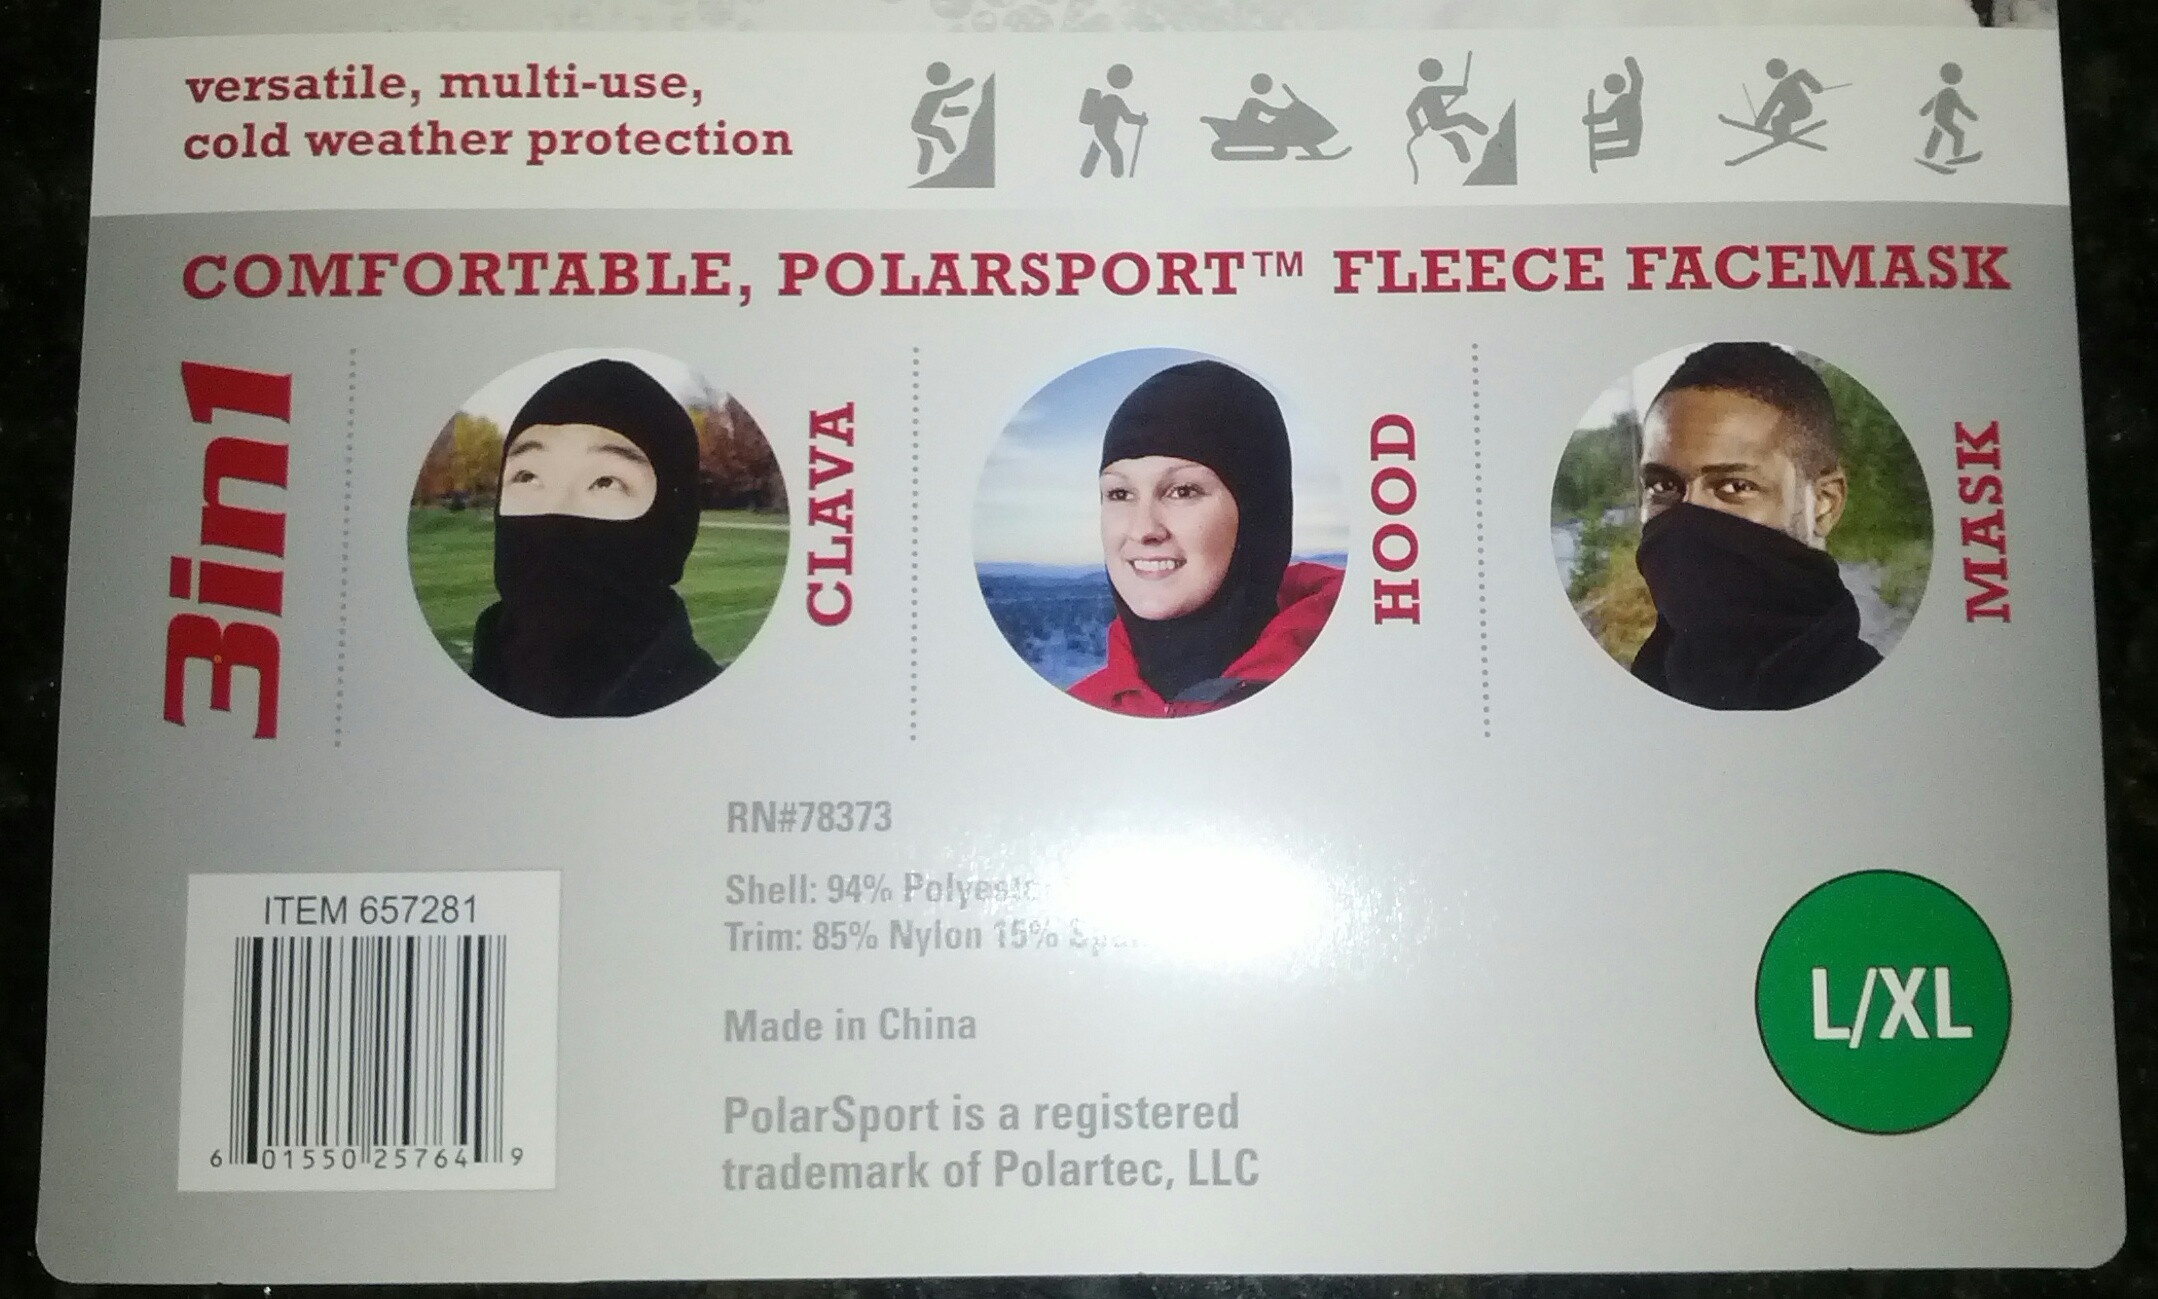 label - versatile, multiuse, cold weather protection cold weather protection Comfortable, Polarsporttm Fleece Facemask Clava Hood Mask Item 657281 Rn Shell 94% Poly Trime 85% Nylon 15 Made in China Polar Sport is a registered trademark of Polartec, Llc LX